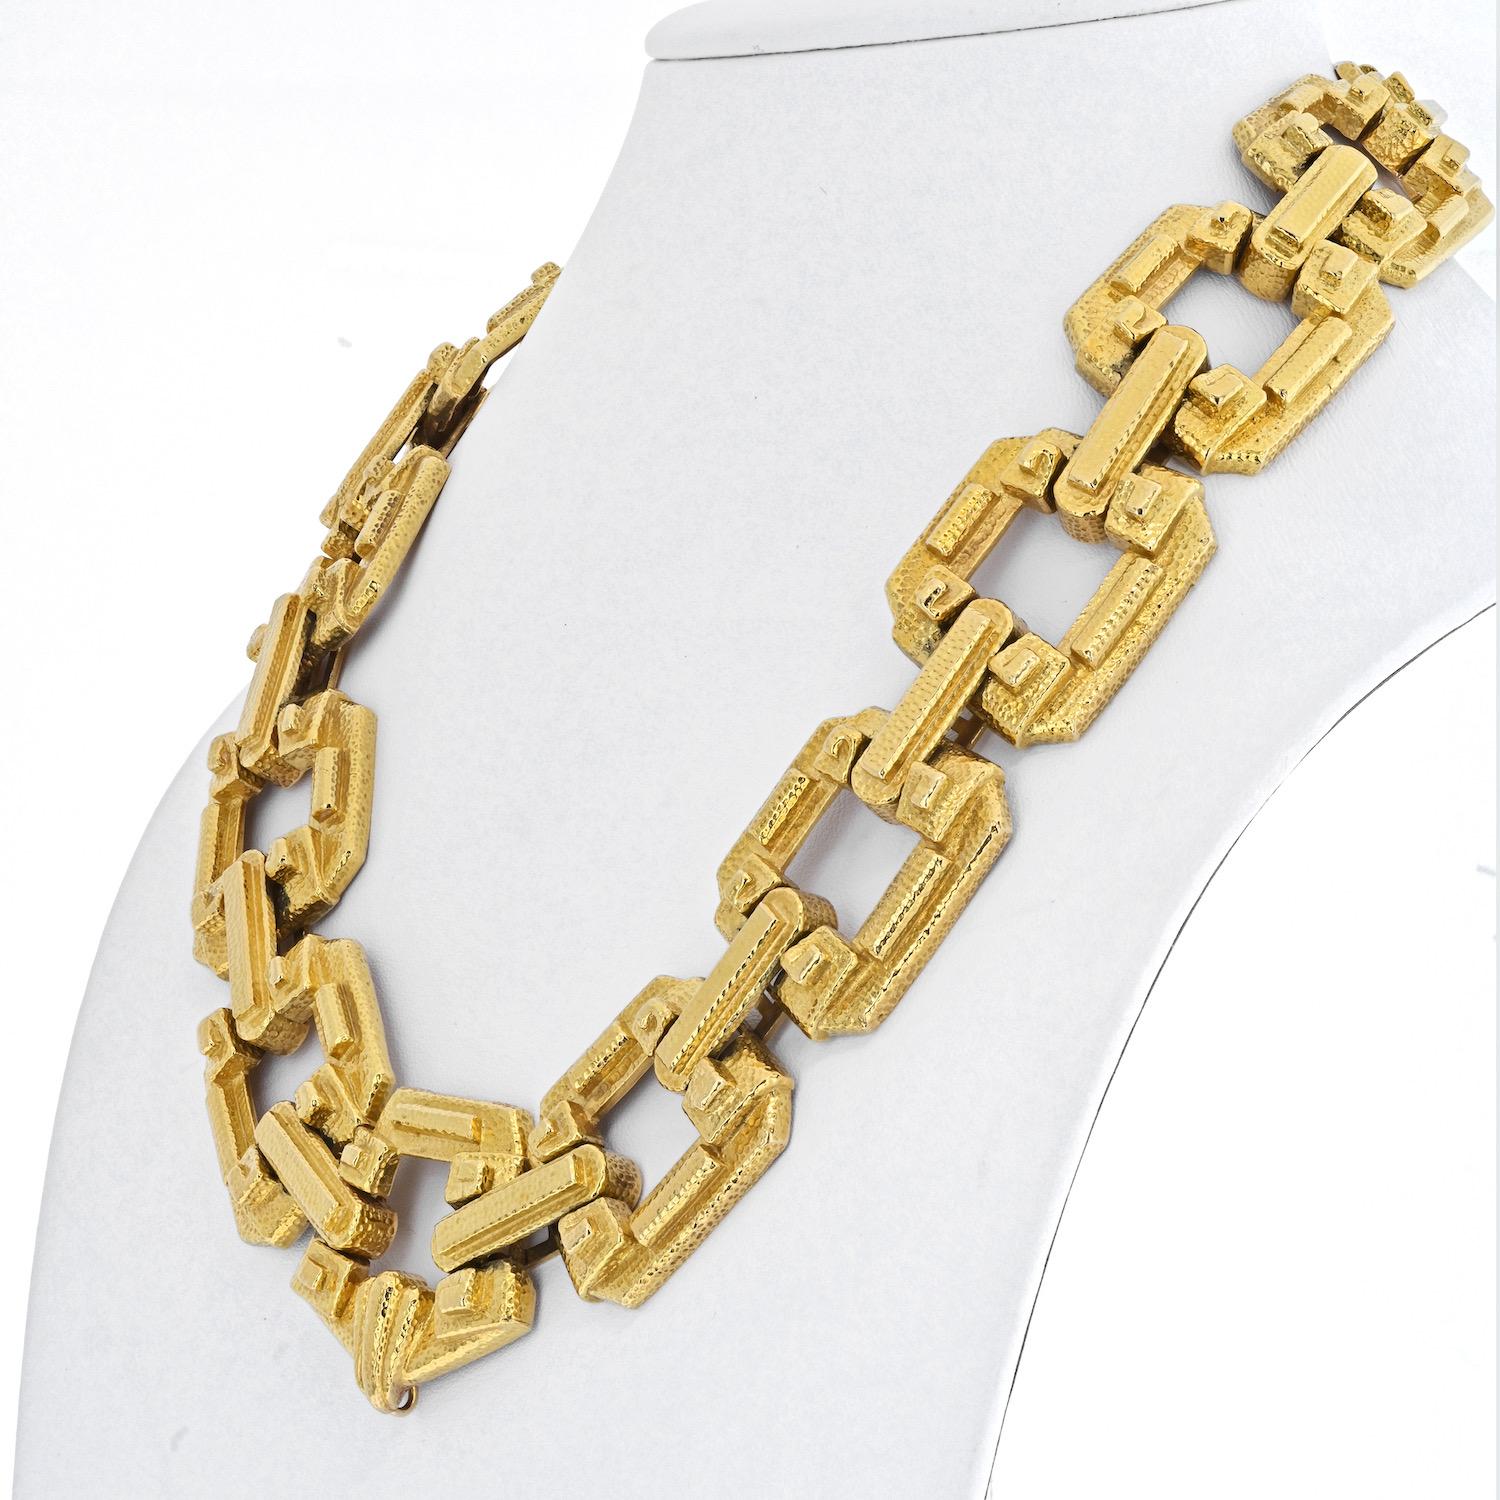 David Webb Hammered Gold Link Necklace
18 kt., composed of graduated modified square-shaped links quartered by raised geometric scrolled sections and raised bars, joined by stepped elongated oval links, signed Webb, ap. 144.6 dwts. Length 19 inches.